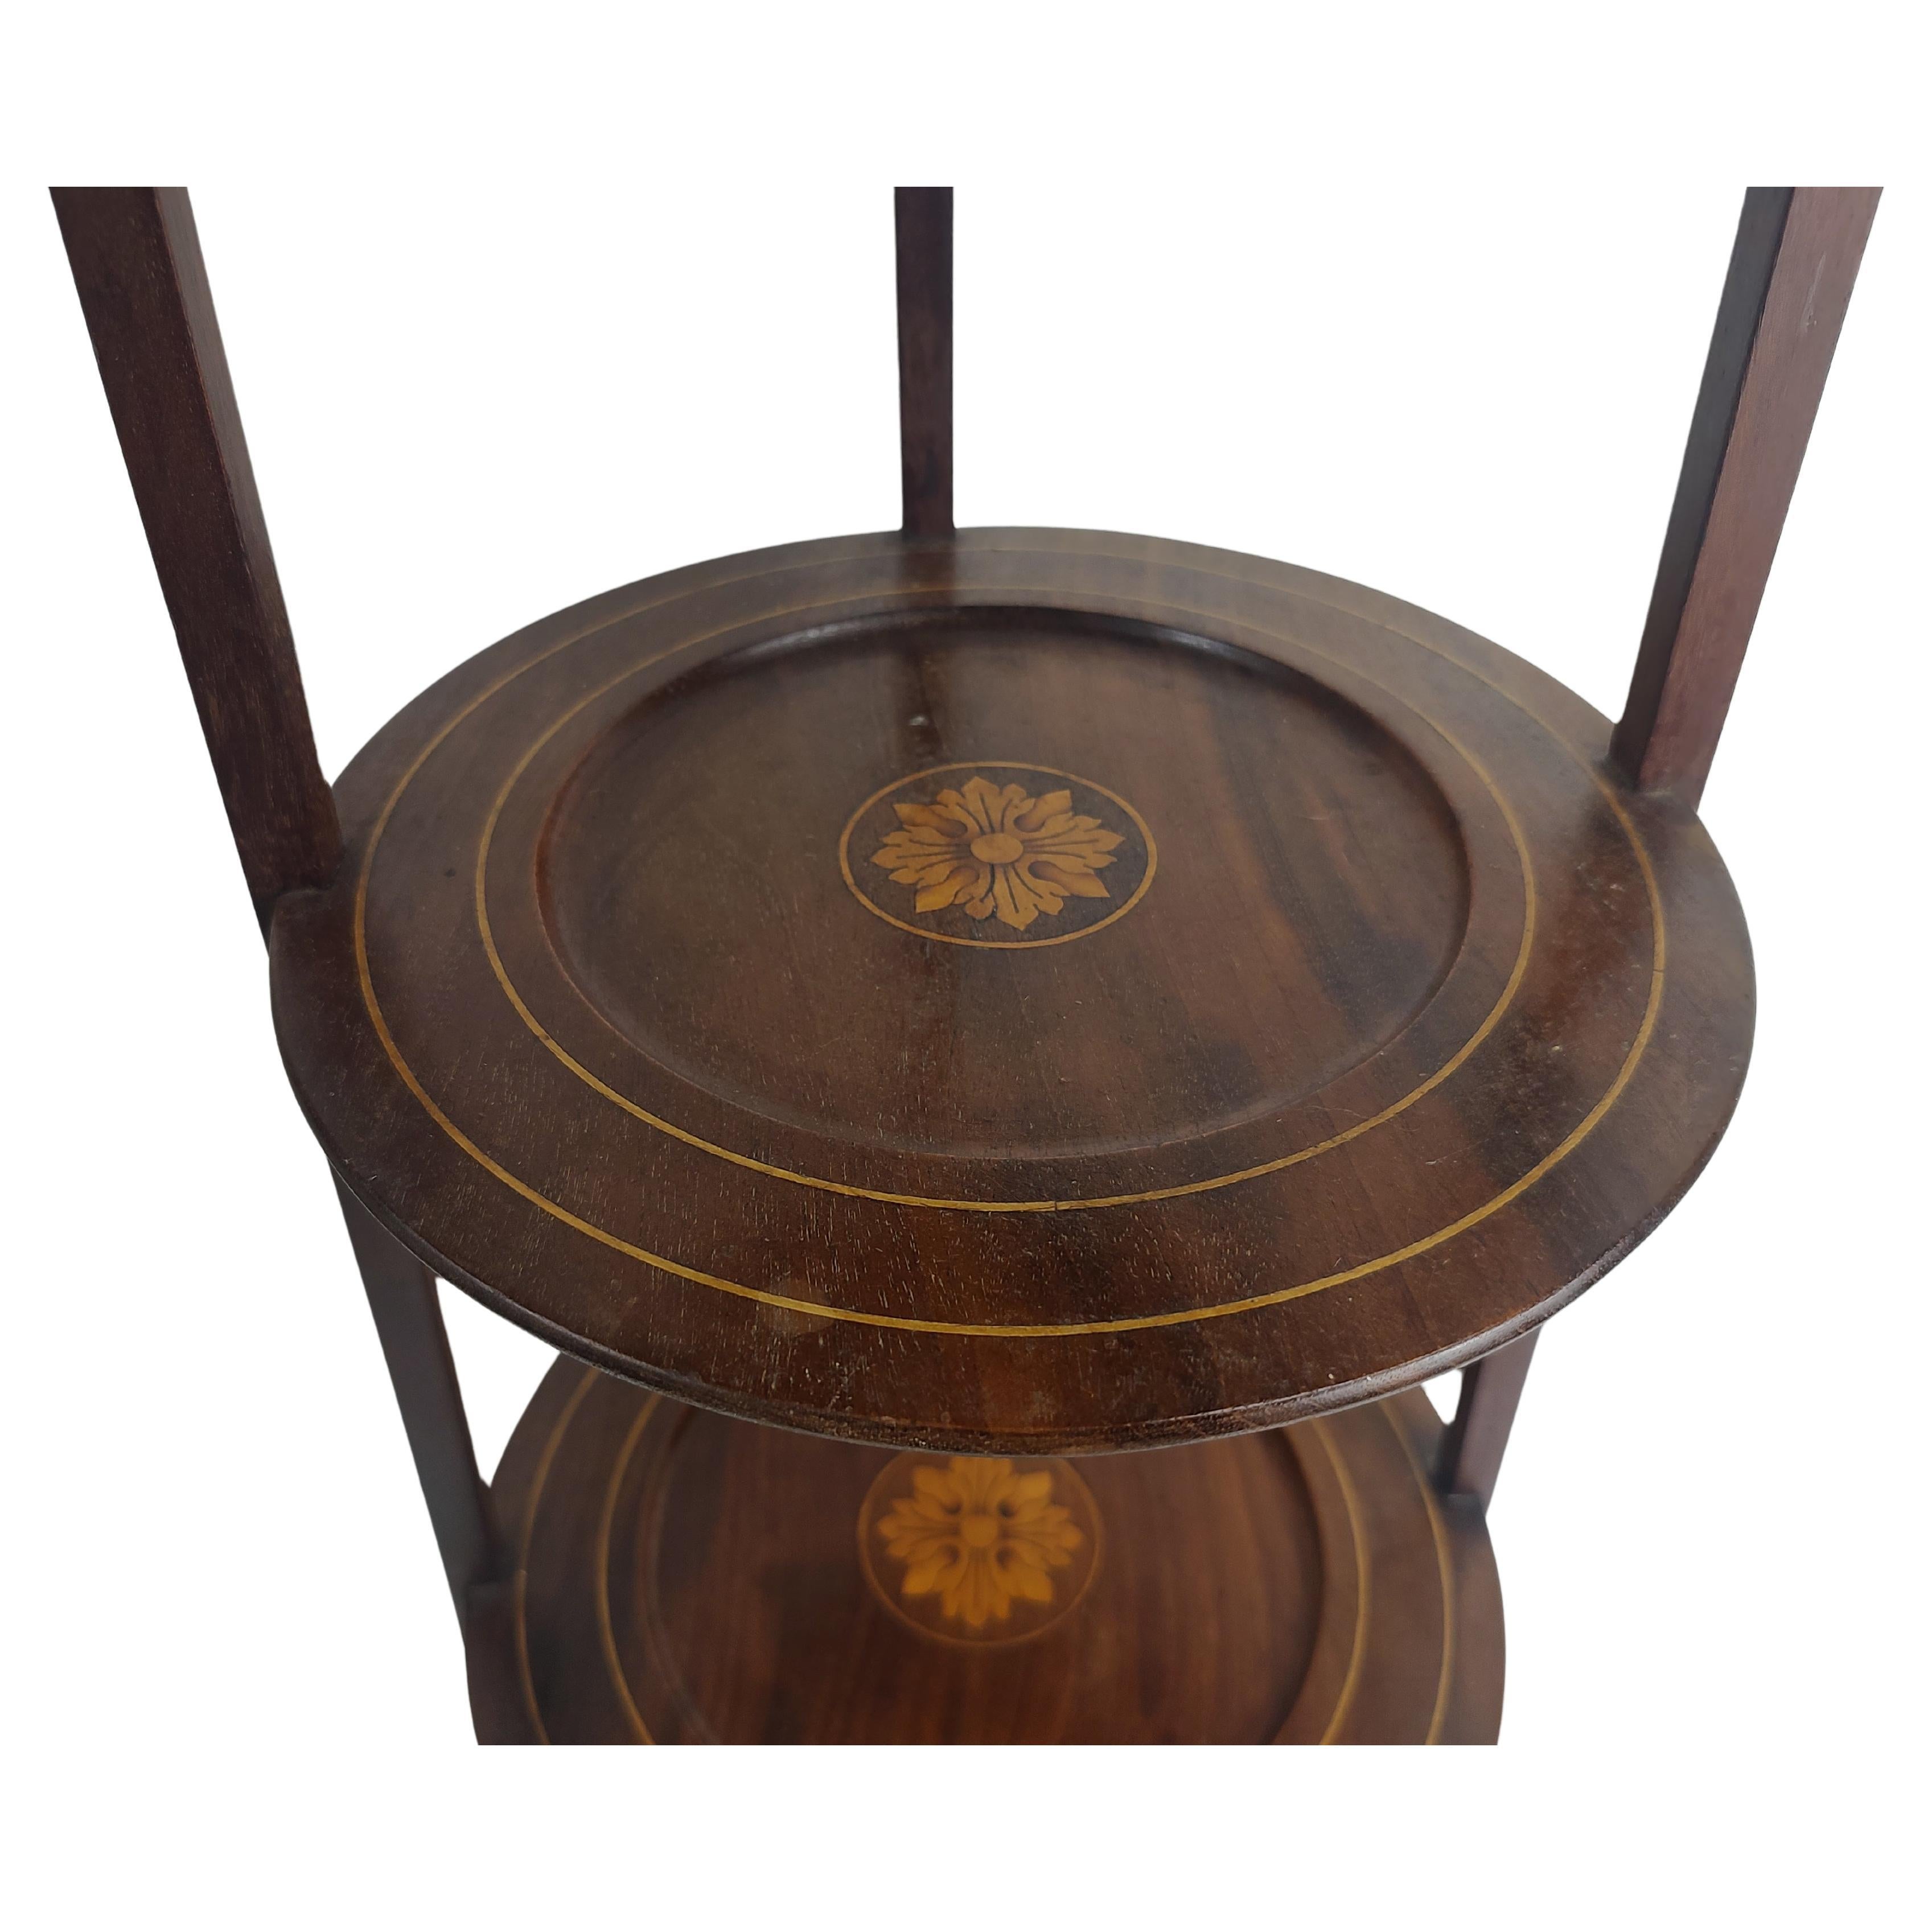 Early 20th Century Antique Mahogany with Inlay and Marquetry 3 Tier Muffin Cake Stand For Sale